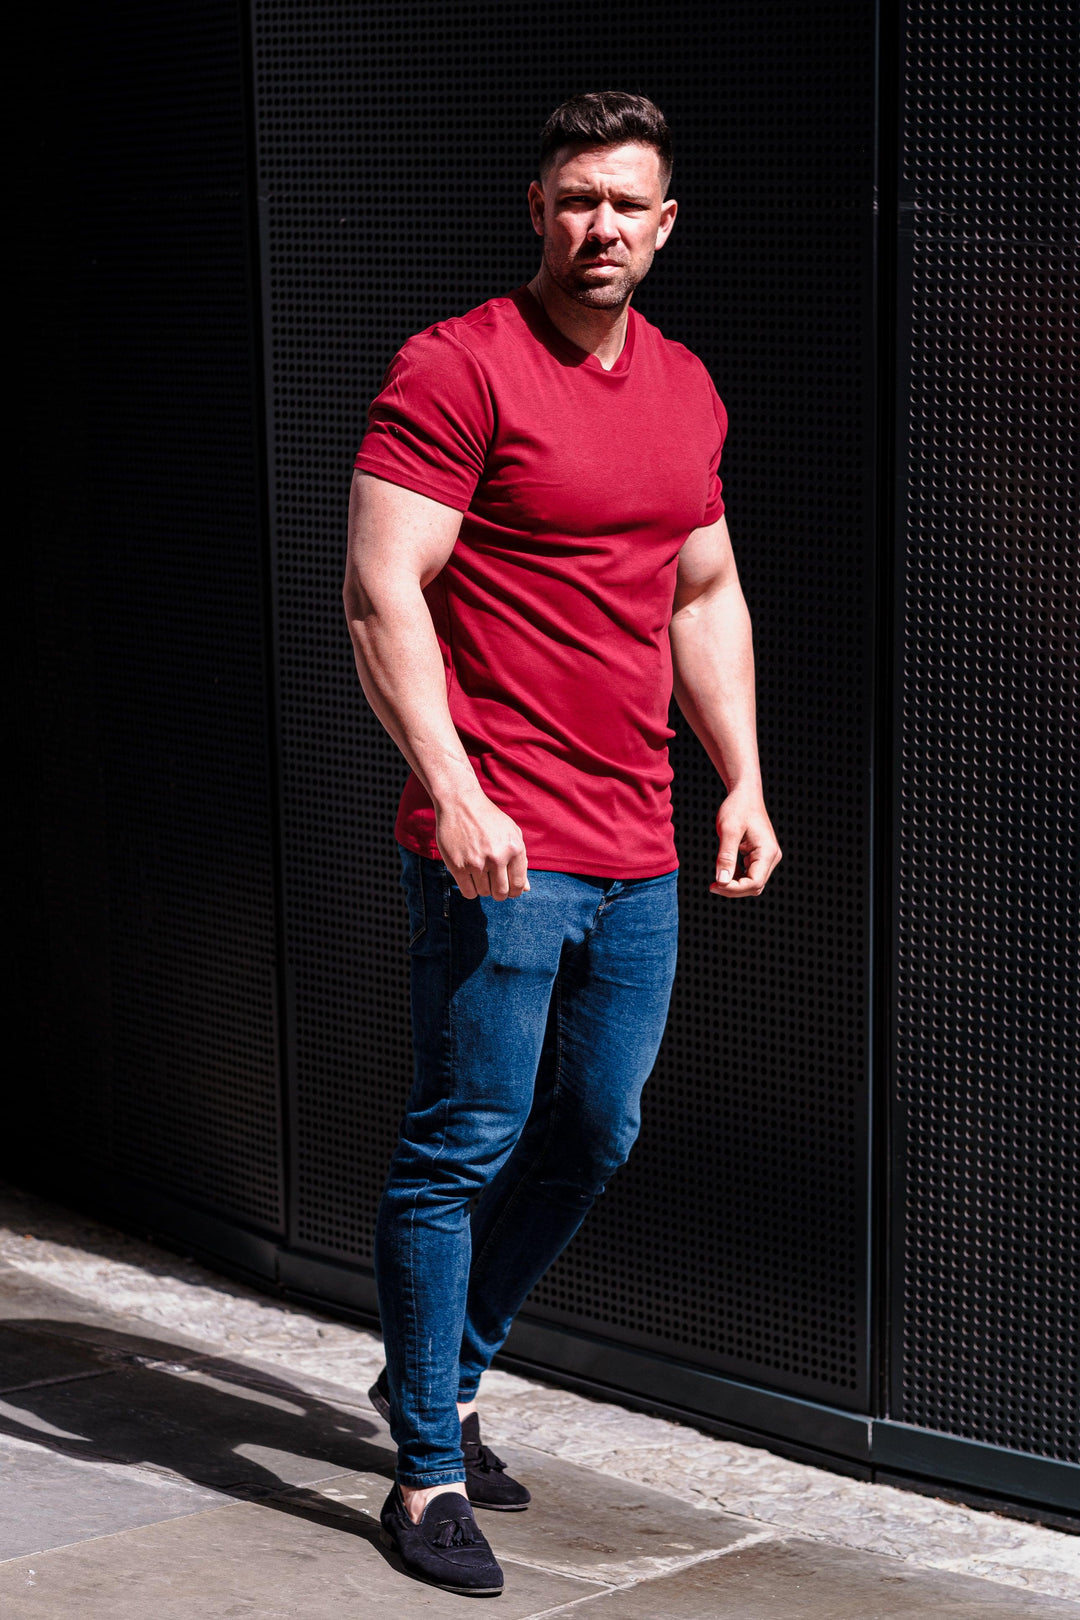 Burgundy Tapered Fit T Shirt. A Proportionally Fitted and Tapered Fit Tee in Burgundy. Ideal for muscular guys.